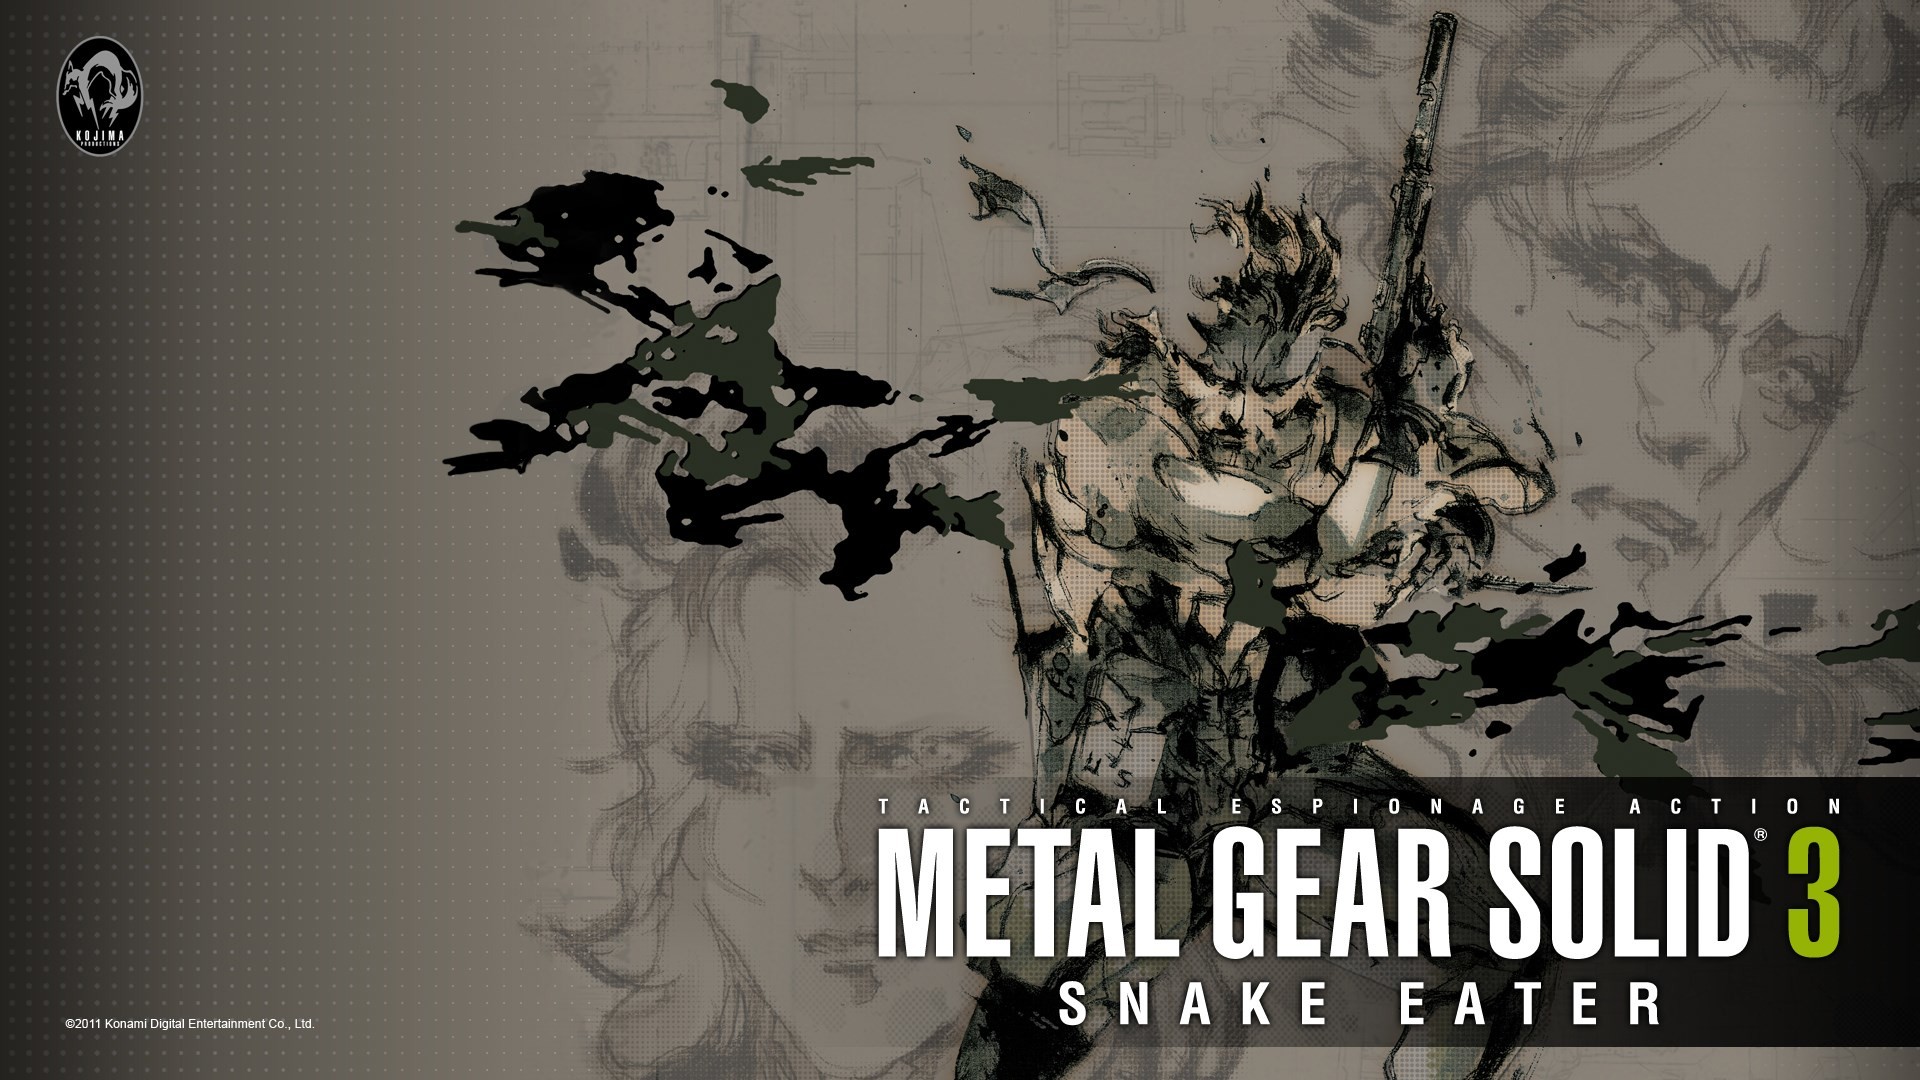 Mgs 3 master collection. Metal Gear Solid 3 ps2. Metal Gear Solid 3 Снейк. Metal Gear Solid Snake Eater 3d. Metal Gear Solid 3 Snake Eater.